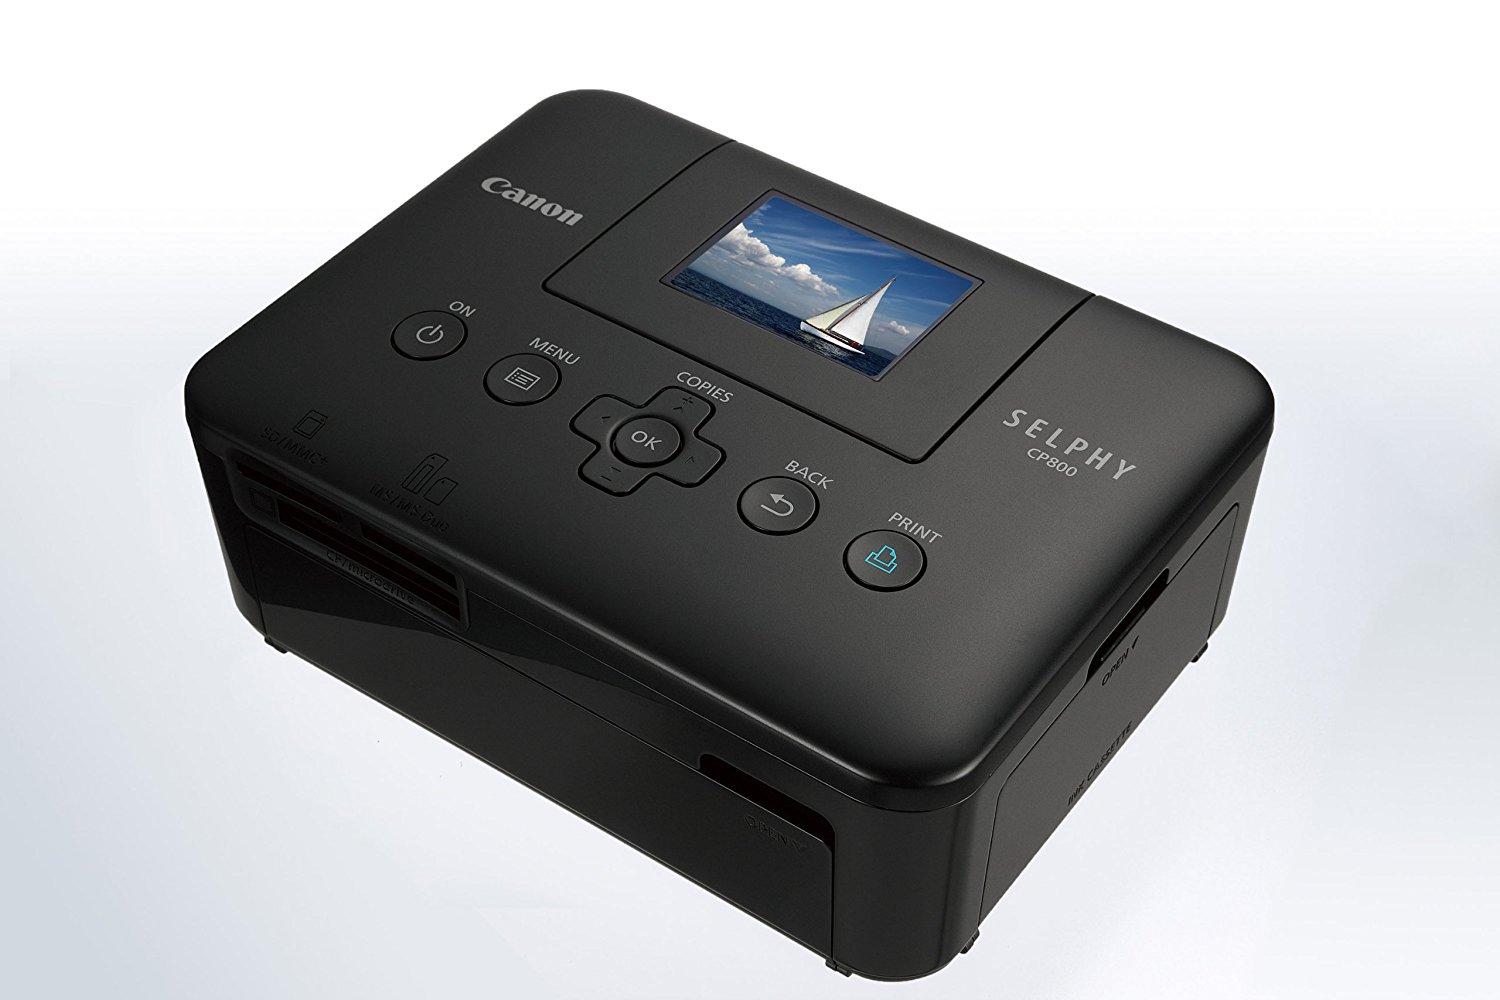 Canon Selphy Cp800 Black Compact Photo Printer 4350b001 N2 Free Image Download 0737